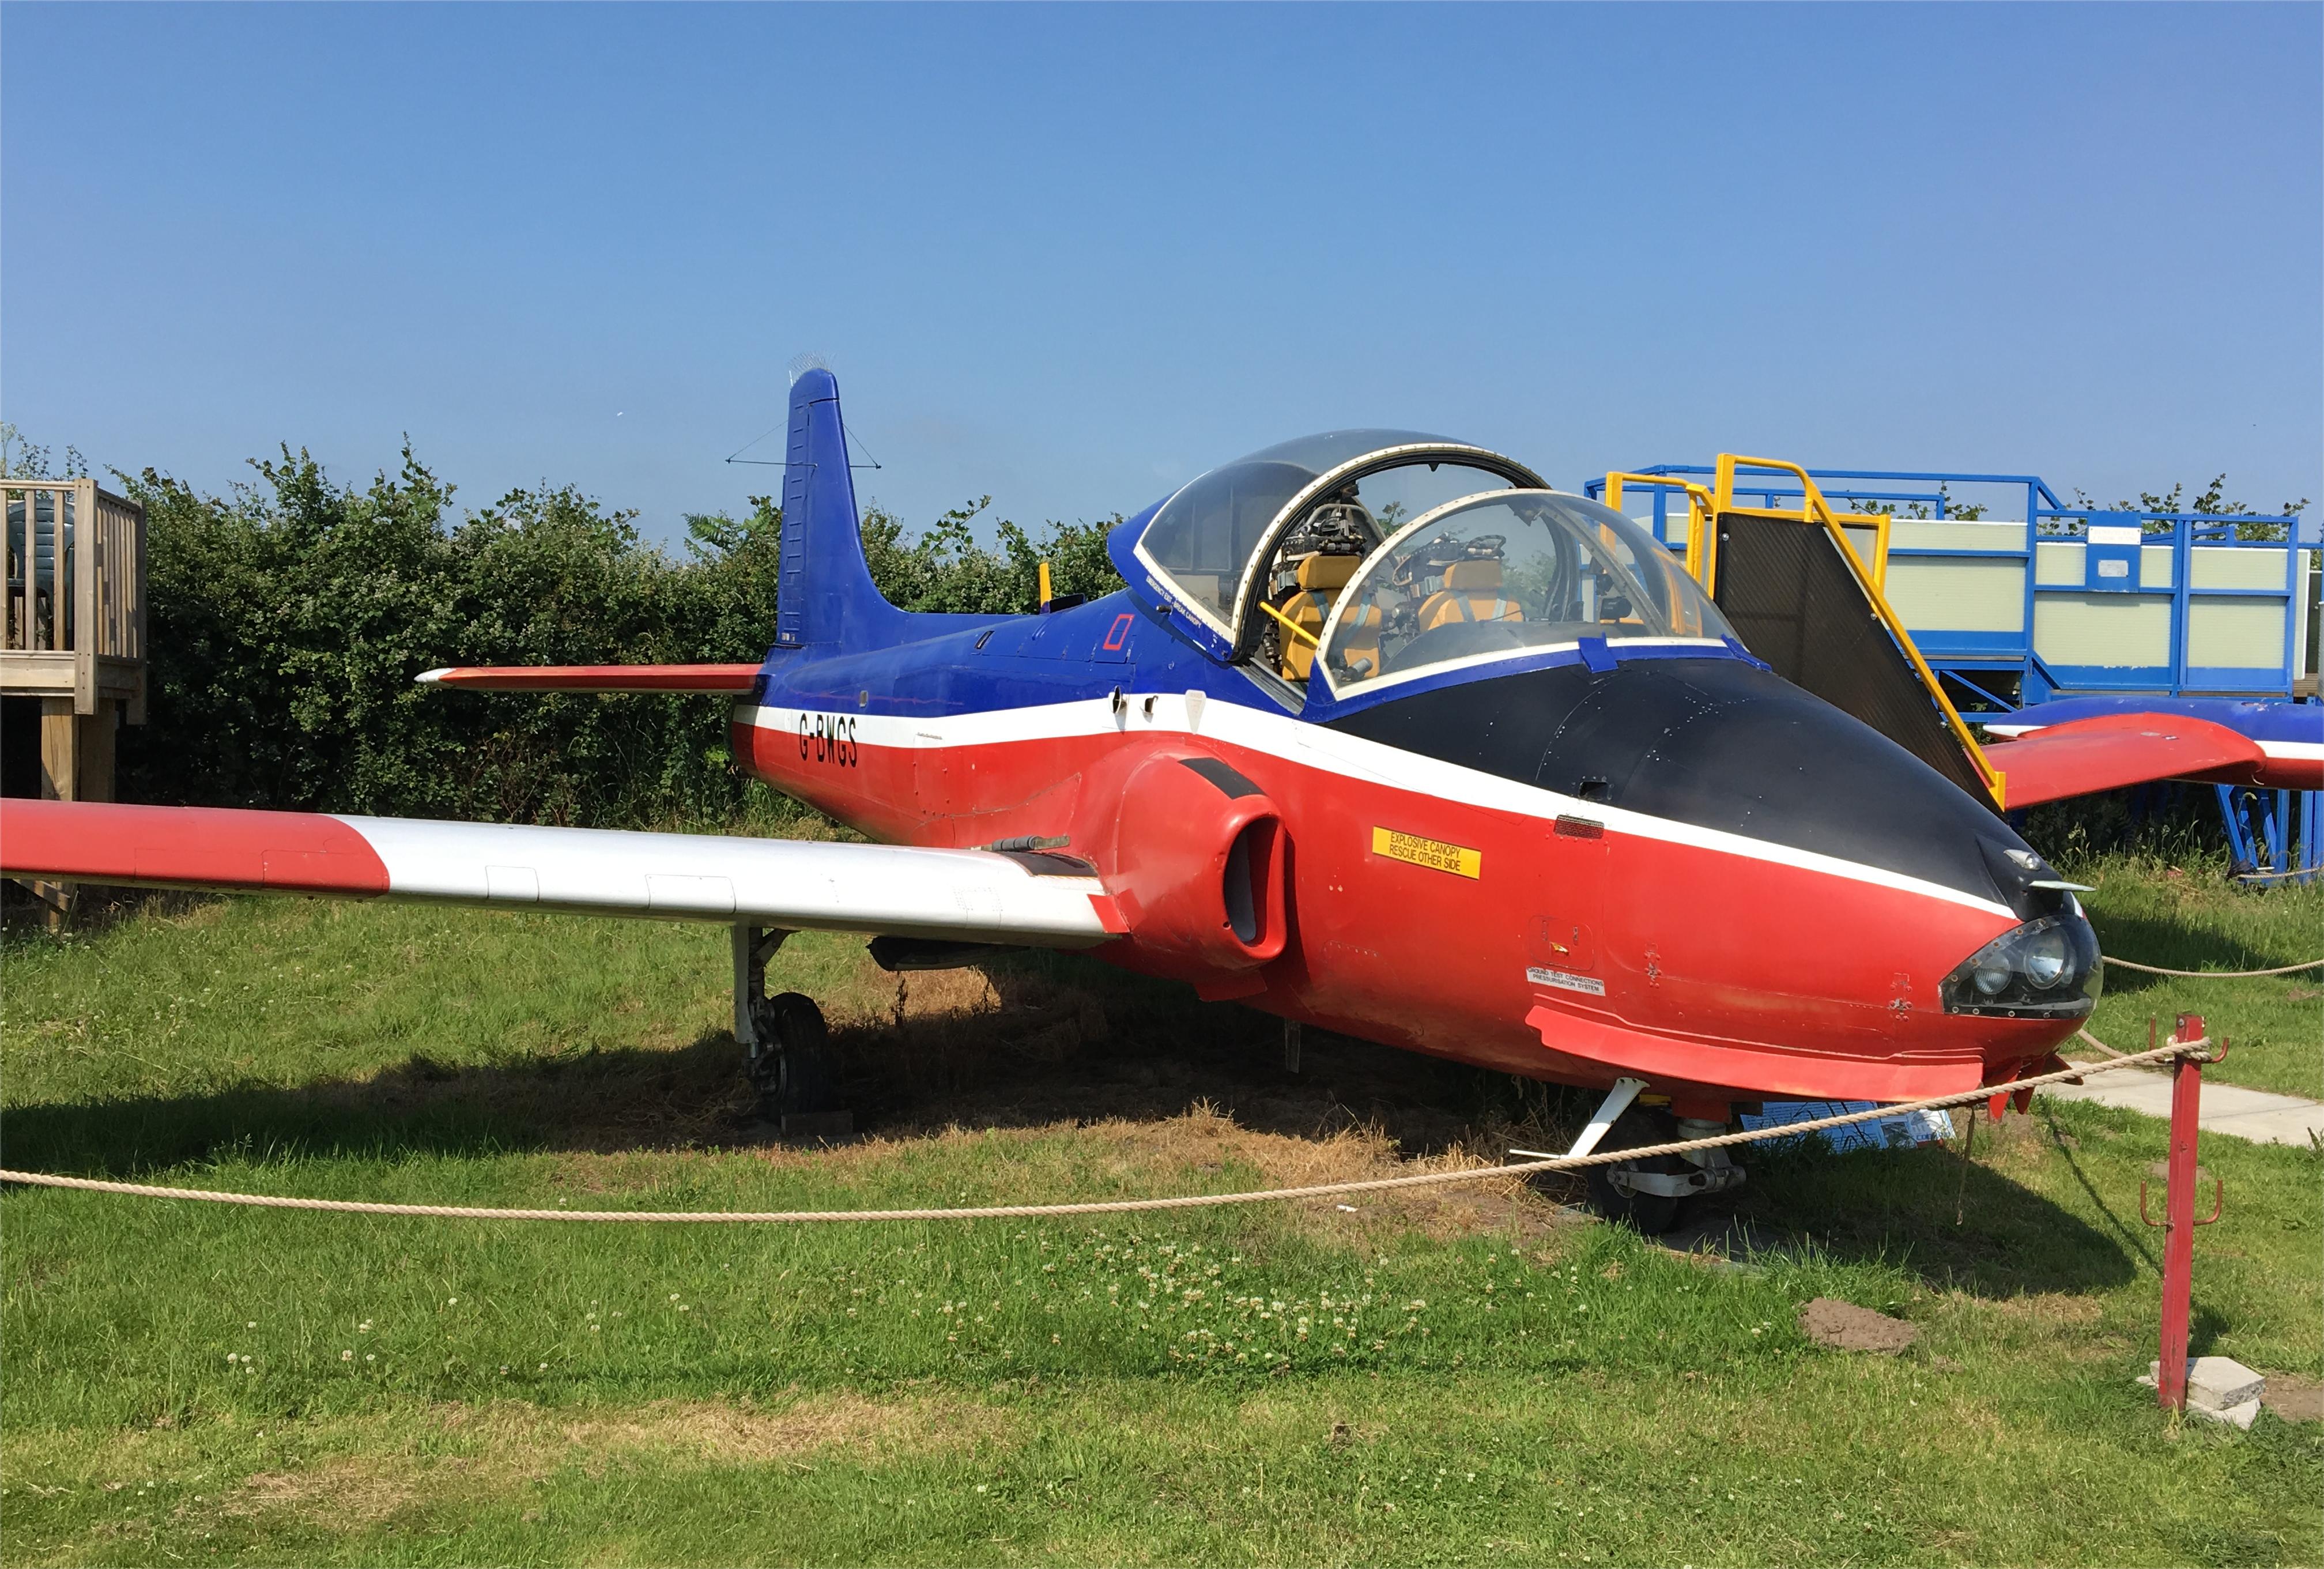 places to visit in bournemouth: bournemouth aviation museum